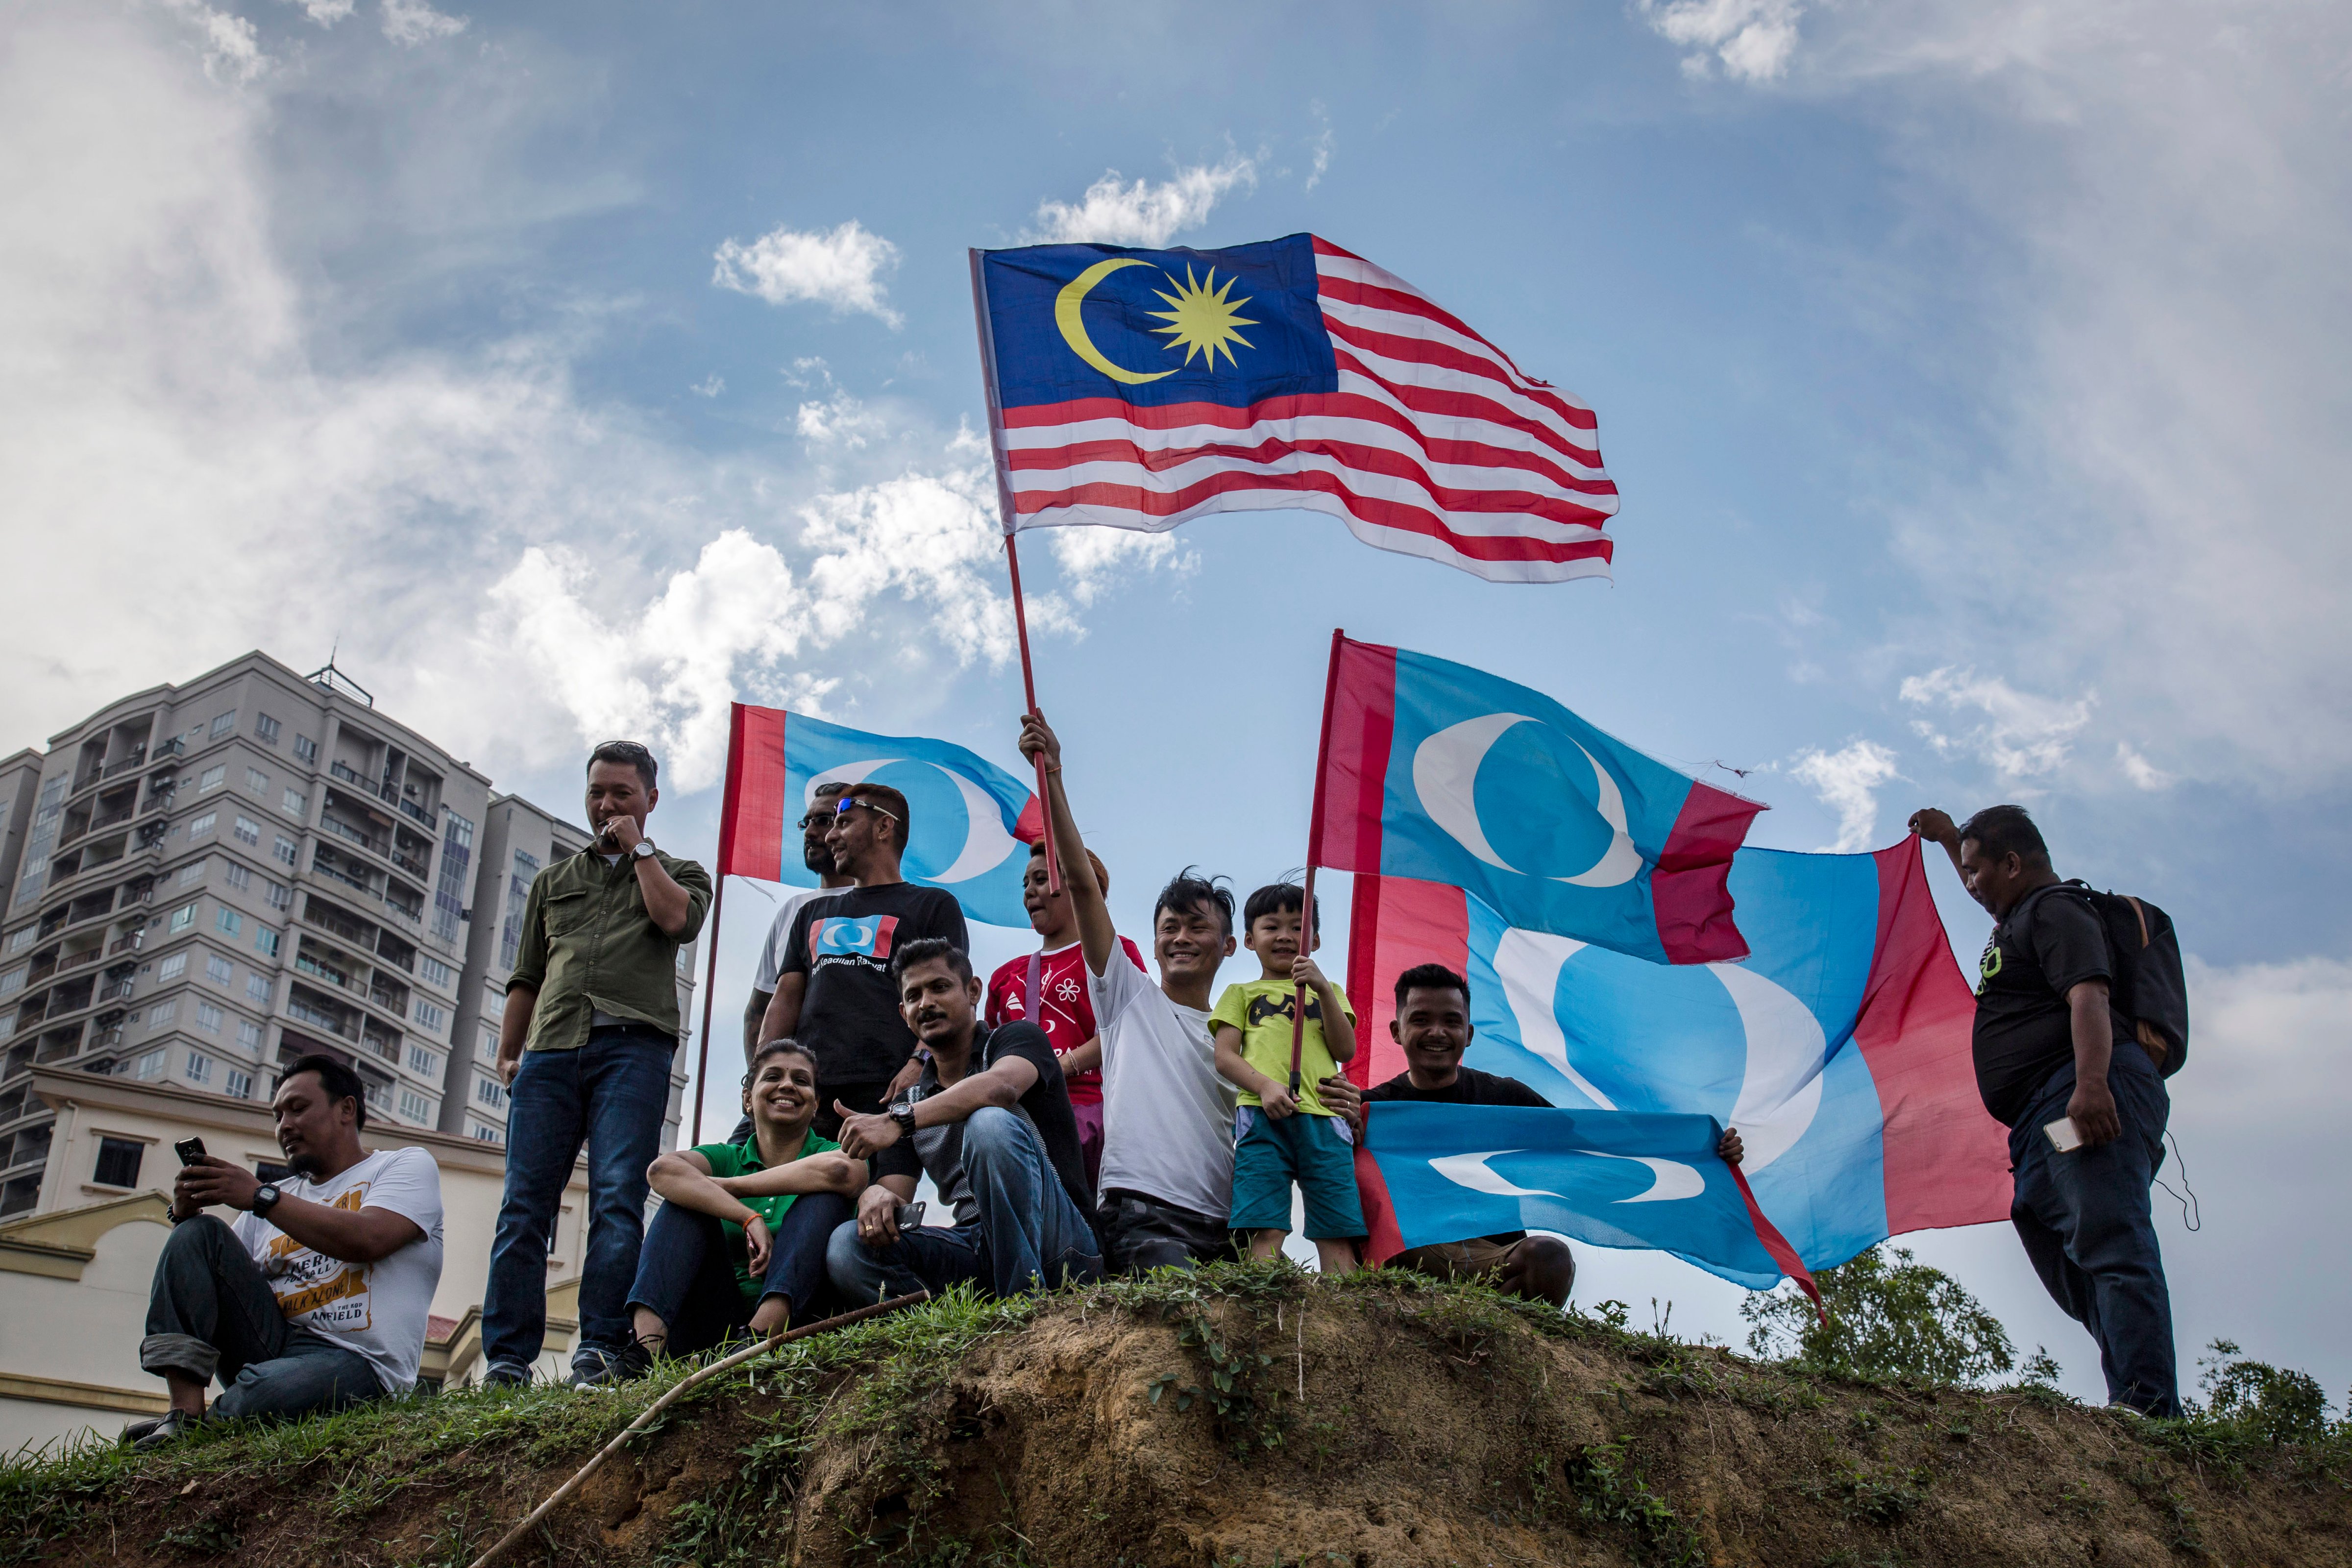 Supporters of 'Pakatan Harapan' (The Alliance of Hope), wait for Mahathir Mohamad to be sworn in as Malaysia's prime minister on May 10, 2018 in Kuala Lumpur, Malaysia. (Ulet Ifansasti—Getty Images)